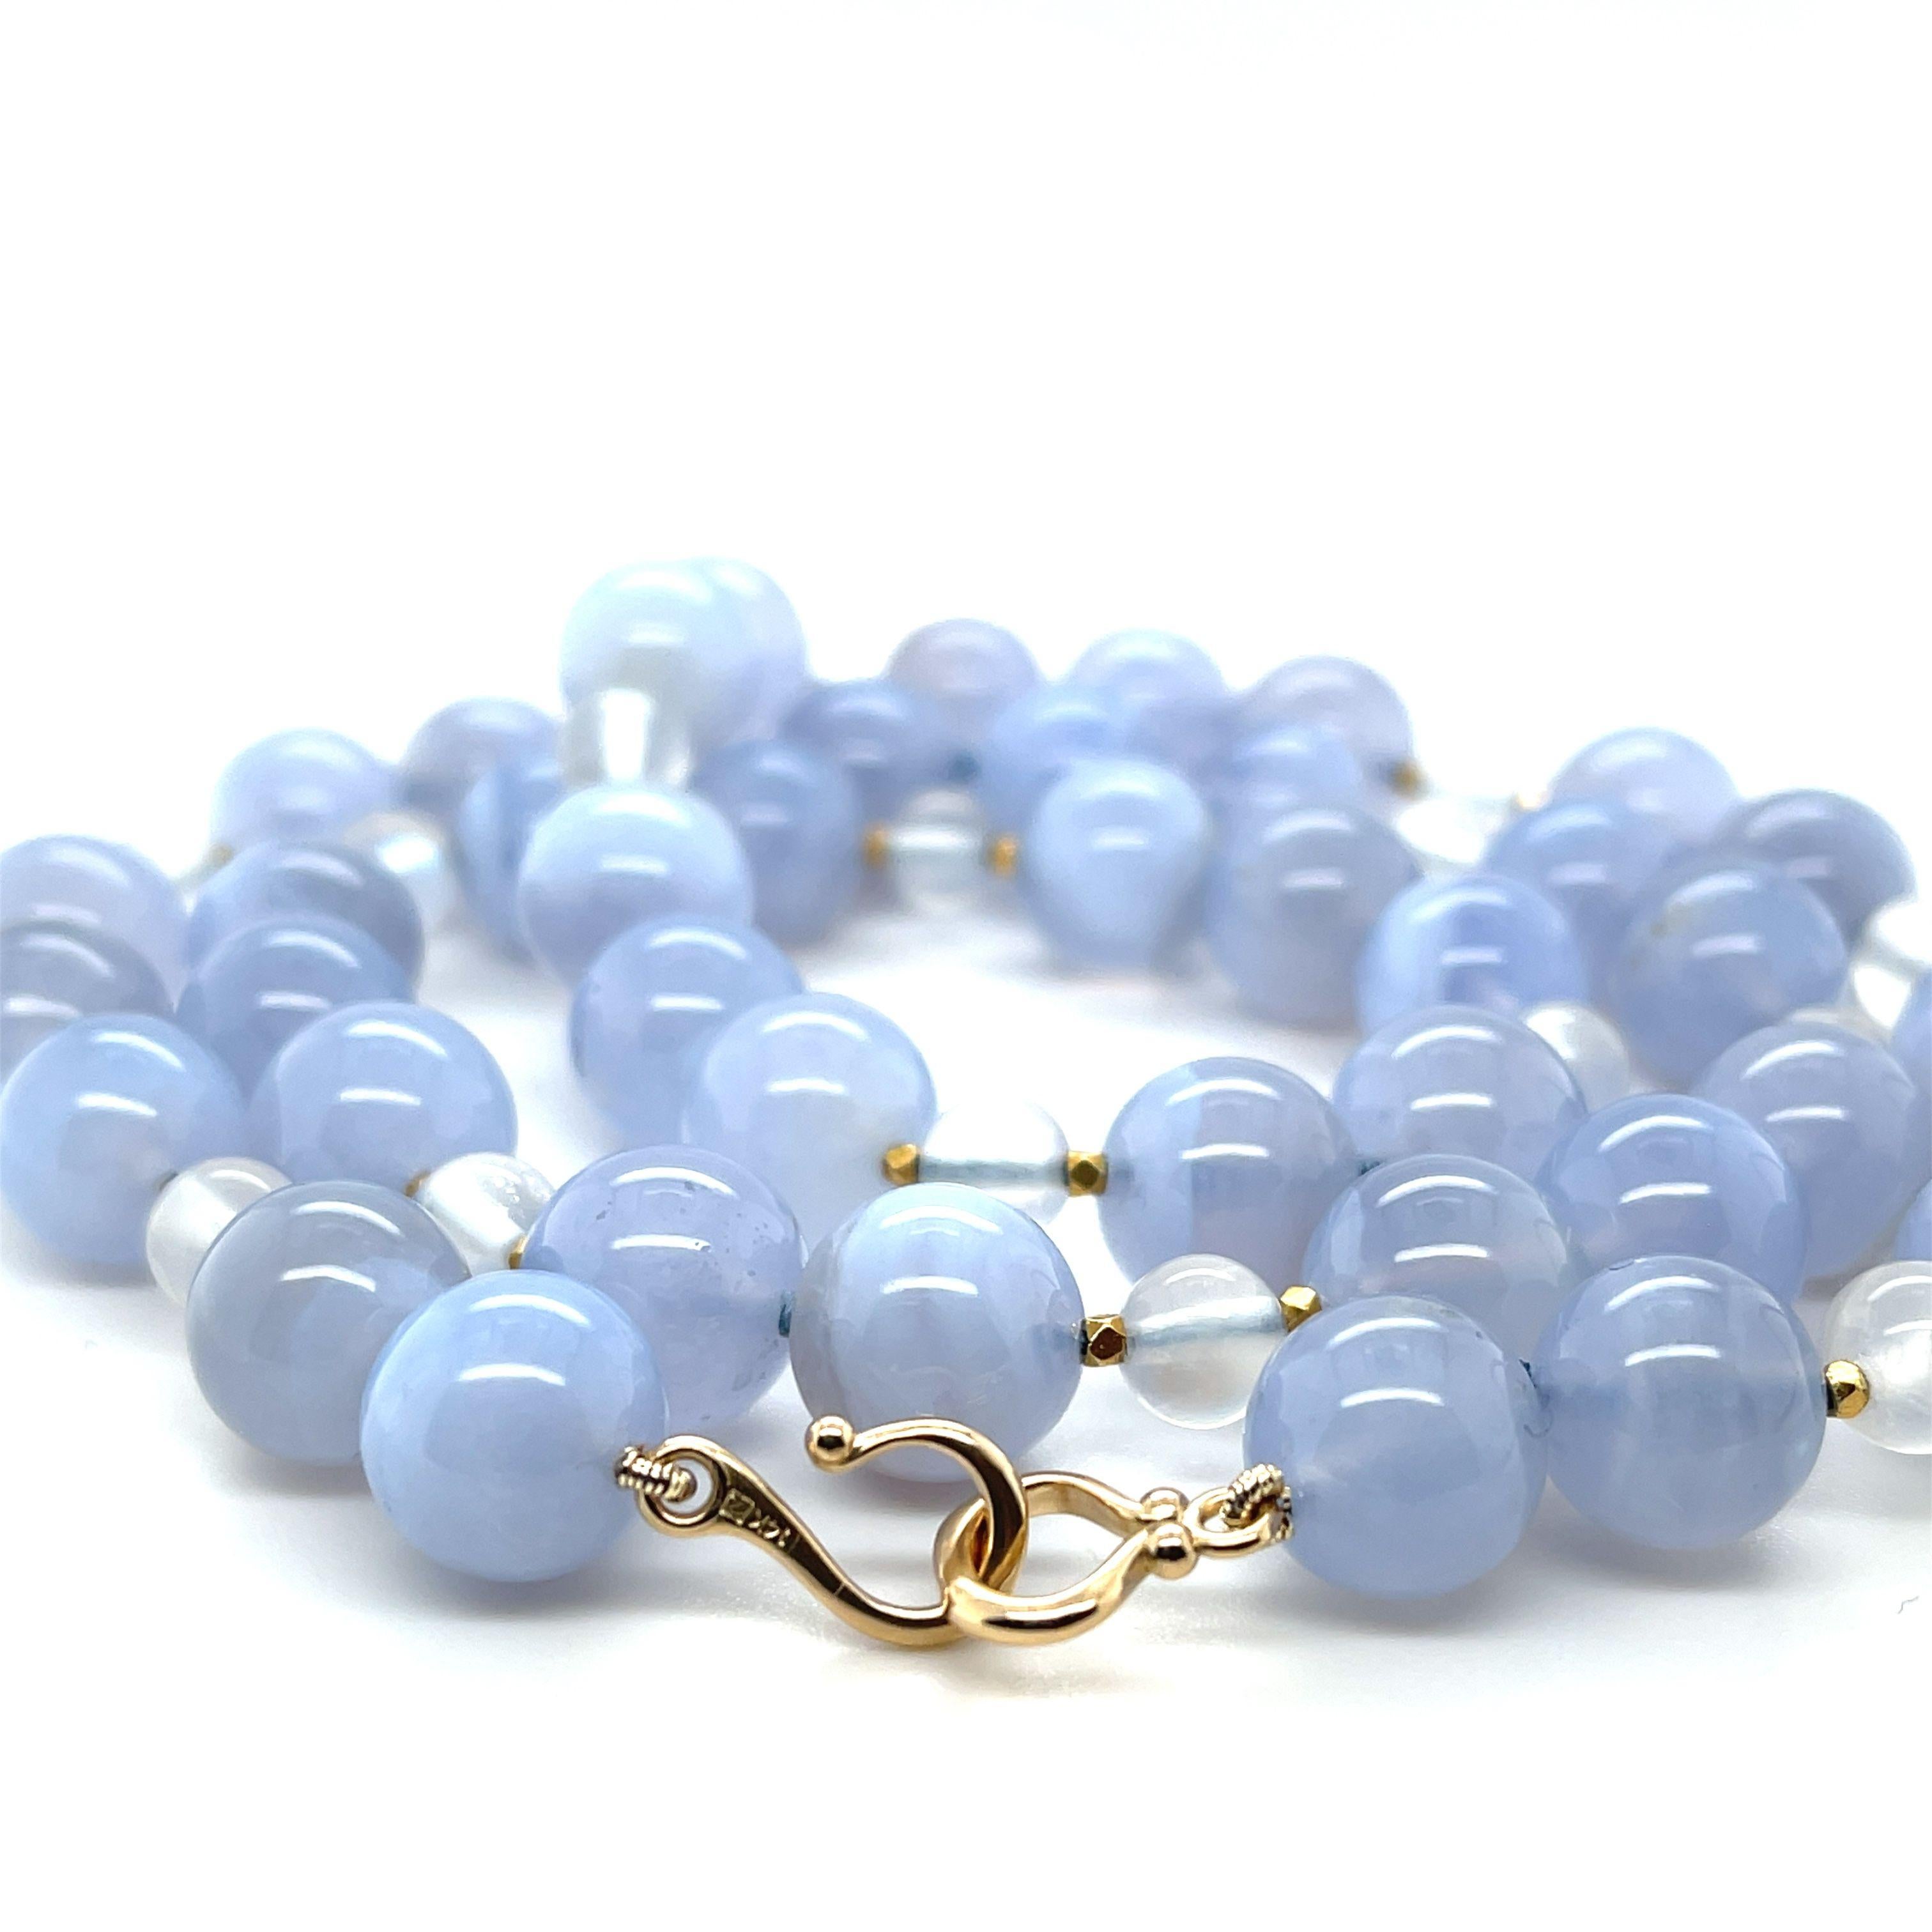 Artisan 10mm Chalcedony and Moonstone Bead Necklace with Yellow Gold Accents For Sale